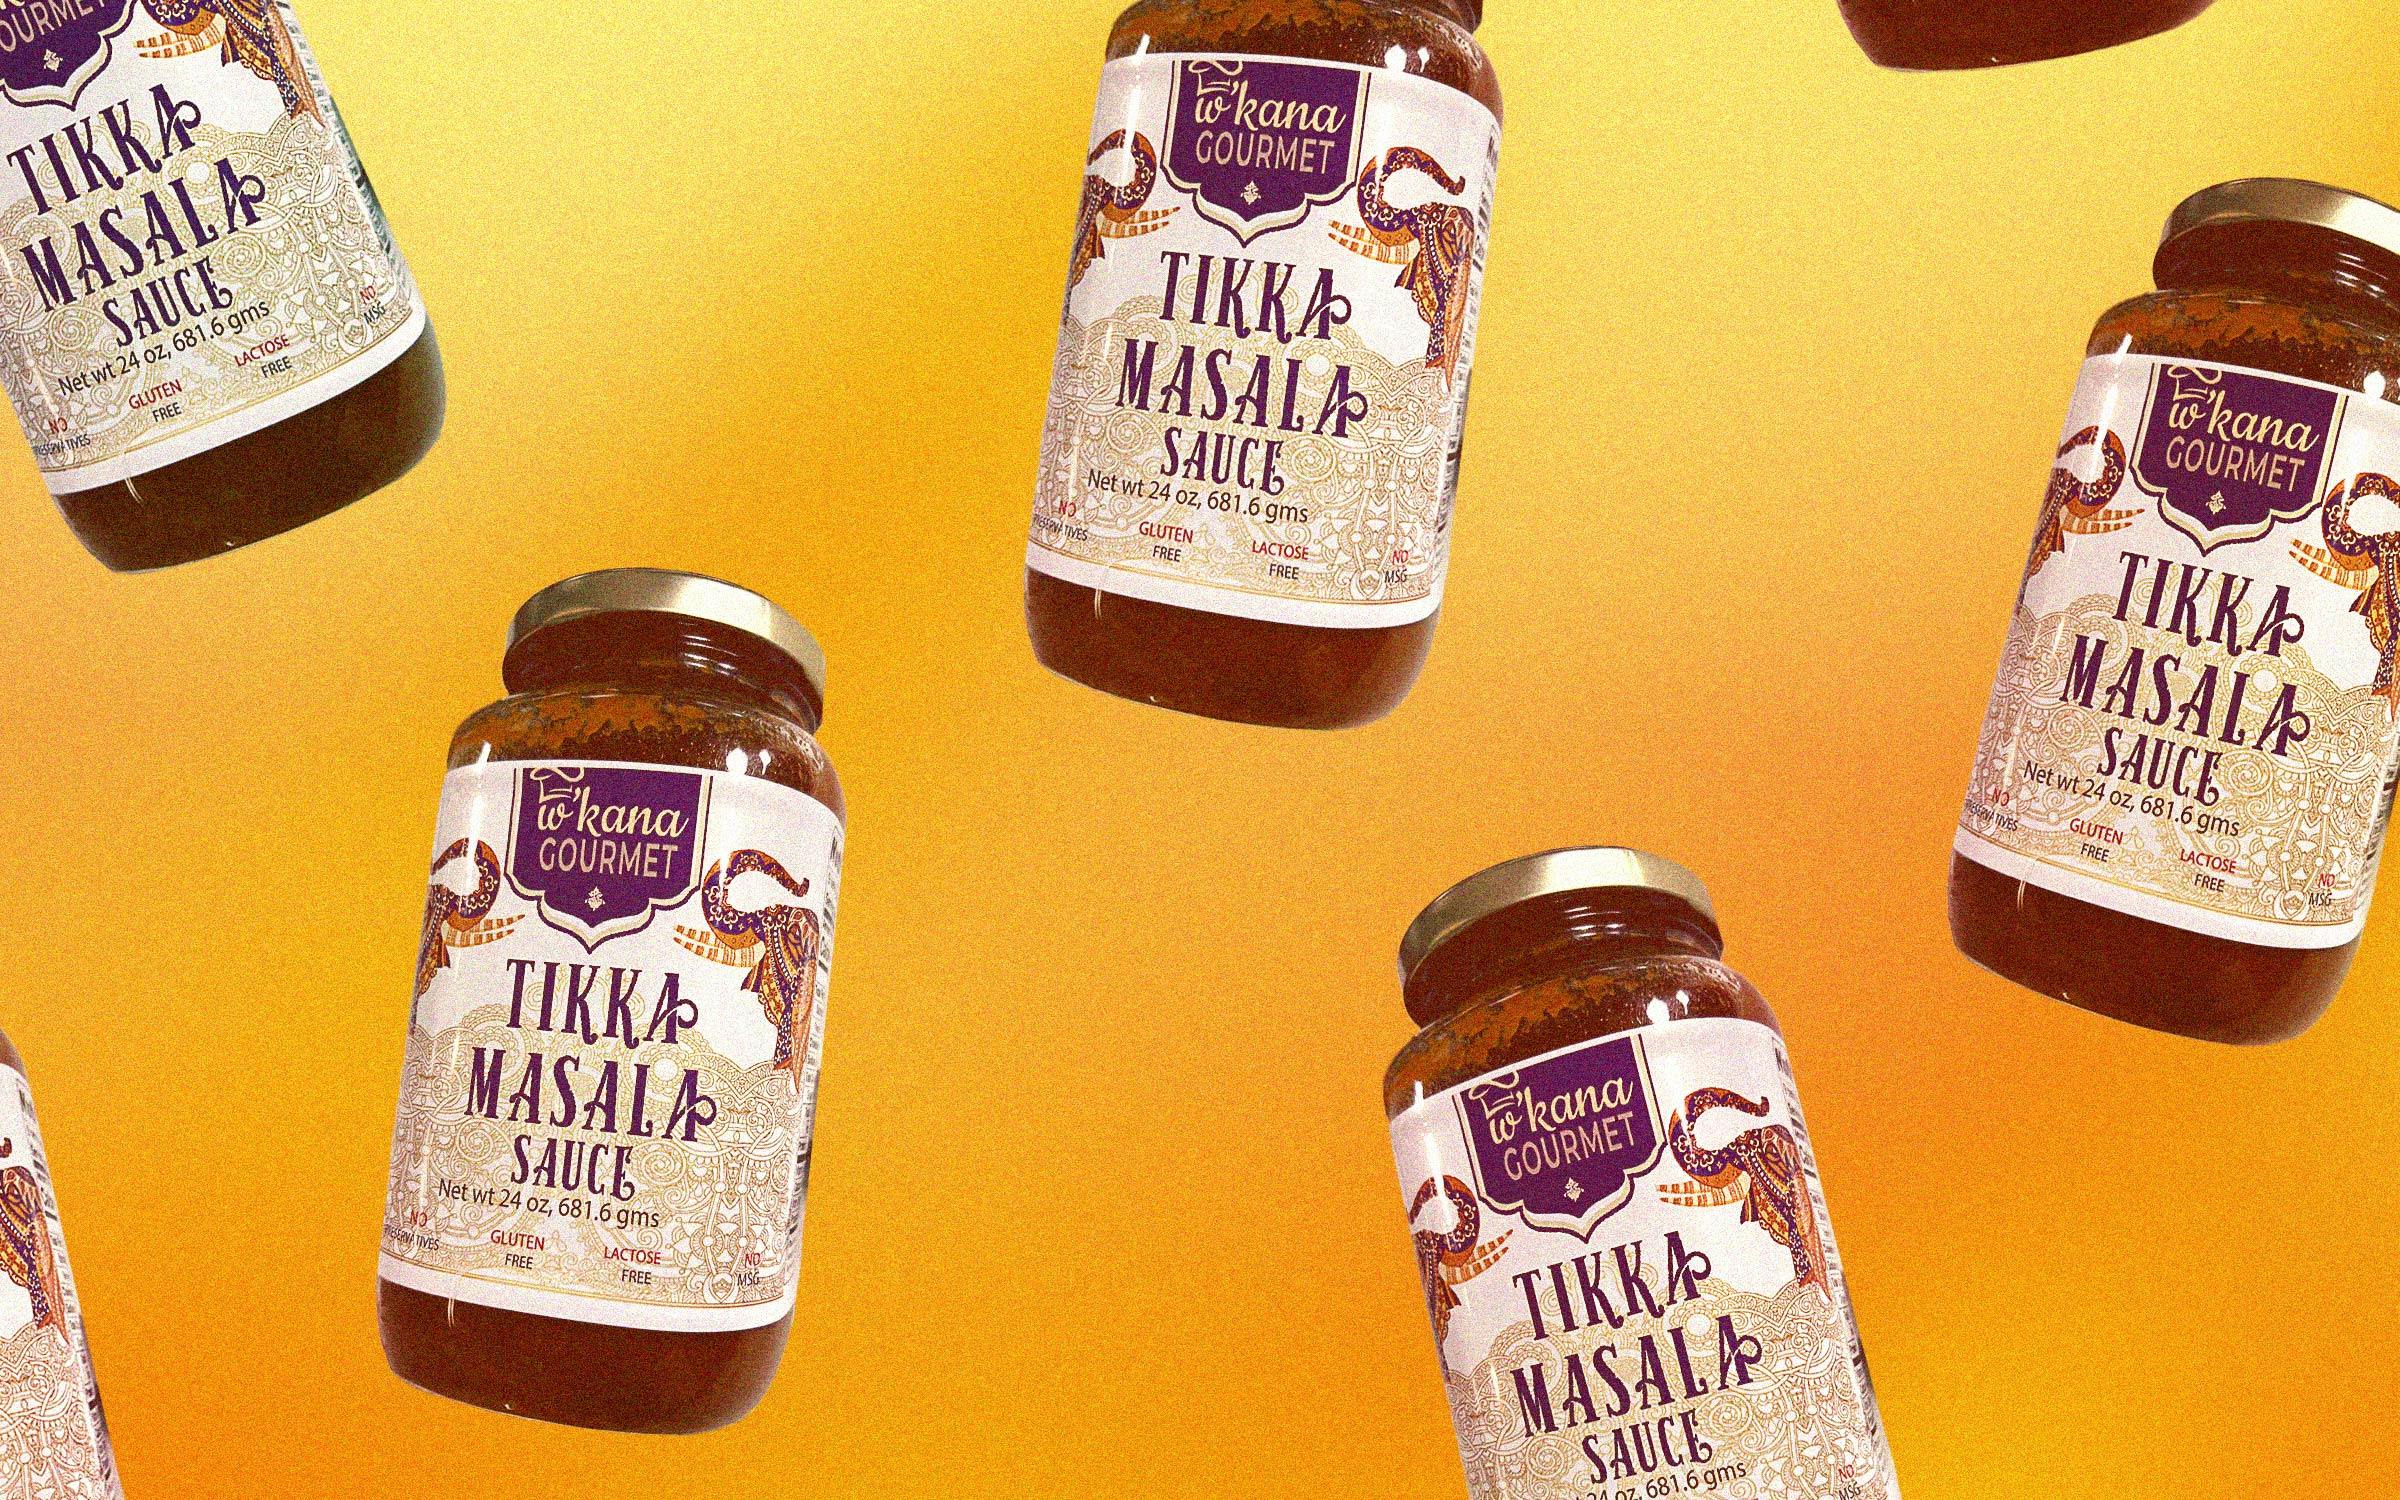 How This Texas Brand of Indian Sauces Got Into Costco